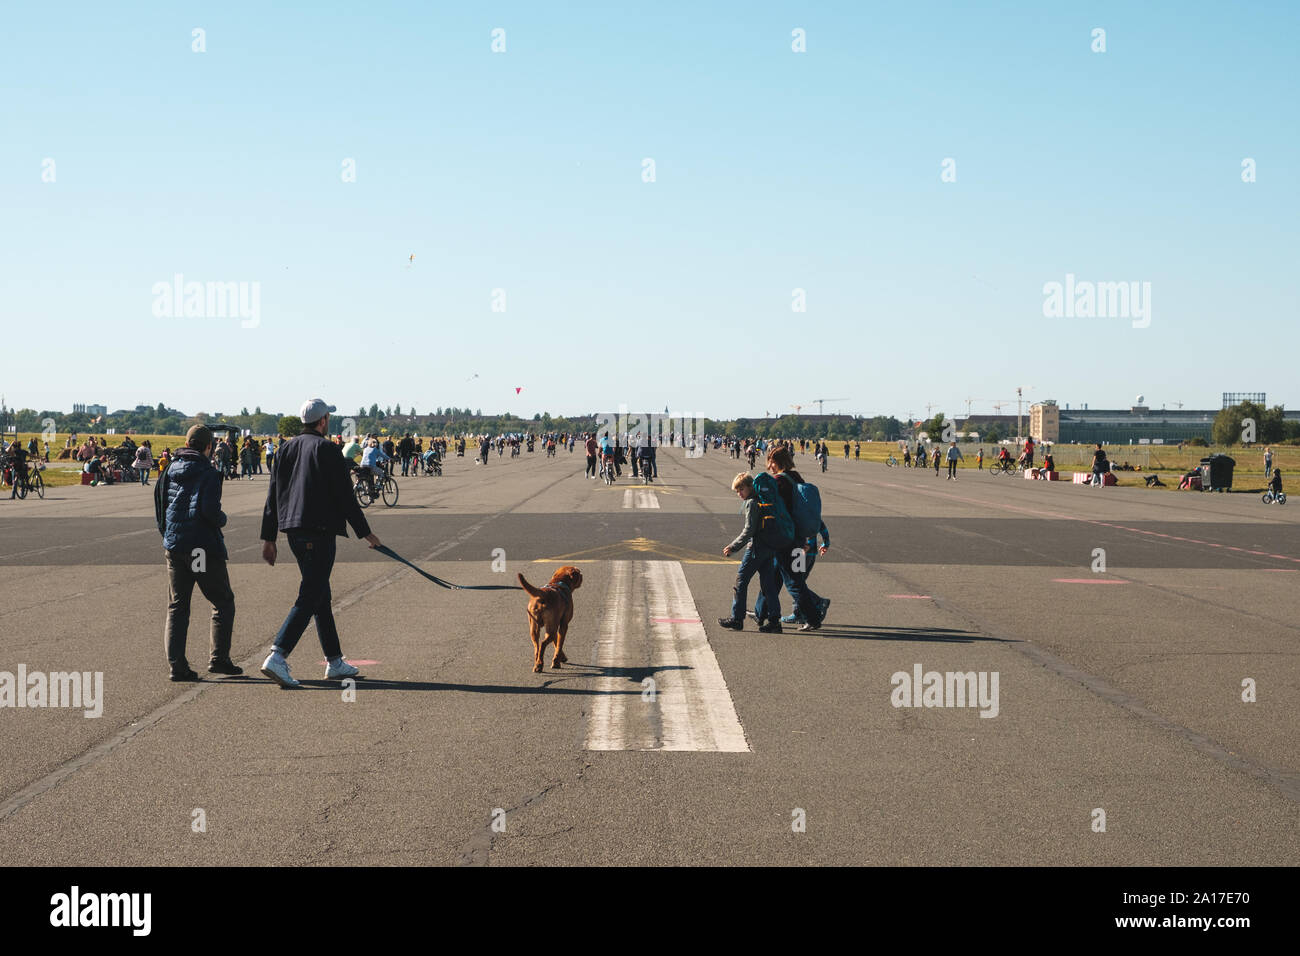 Berlin, Germany - September 2019: Many People walking with dog on street or Airfield (Flughafen Tempelhof), former city airport in Berlin Stock Photo